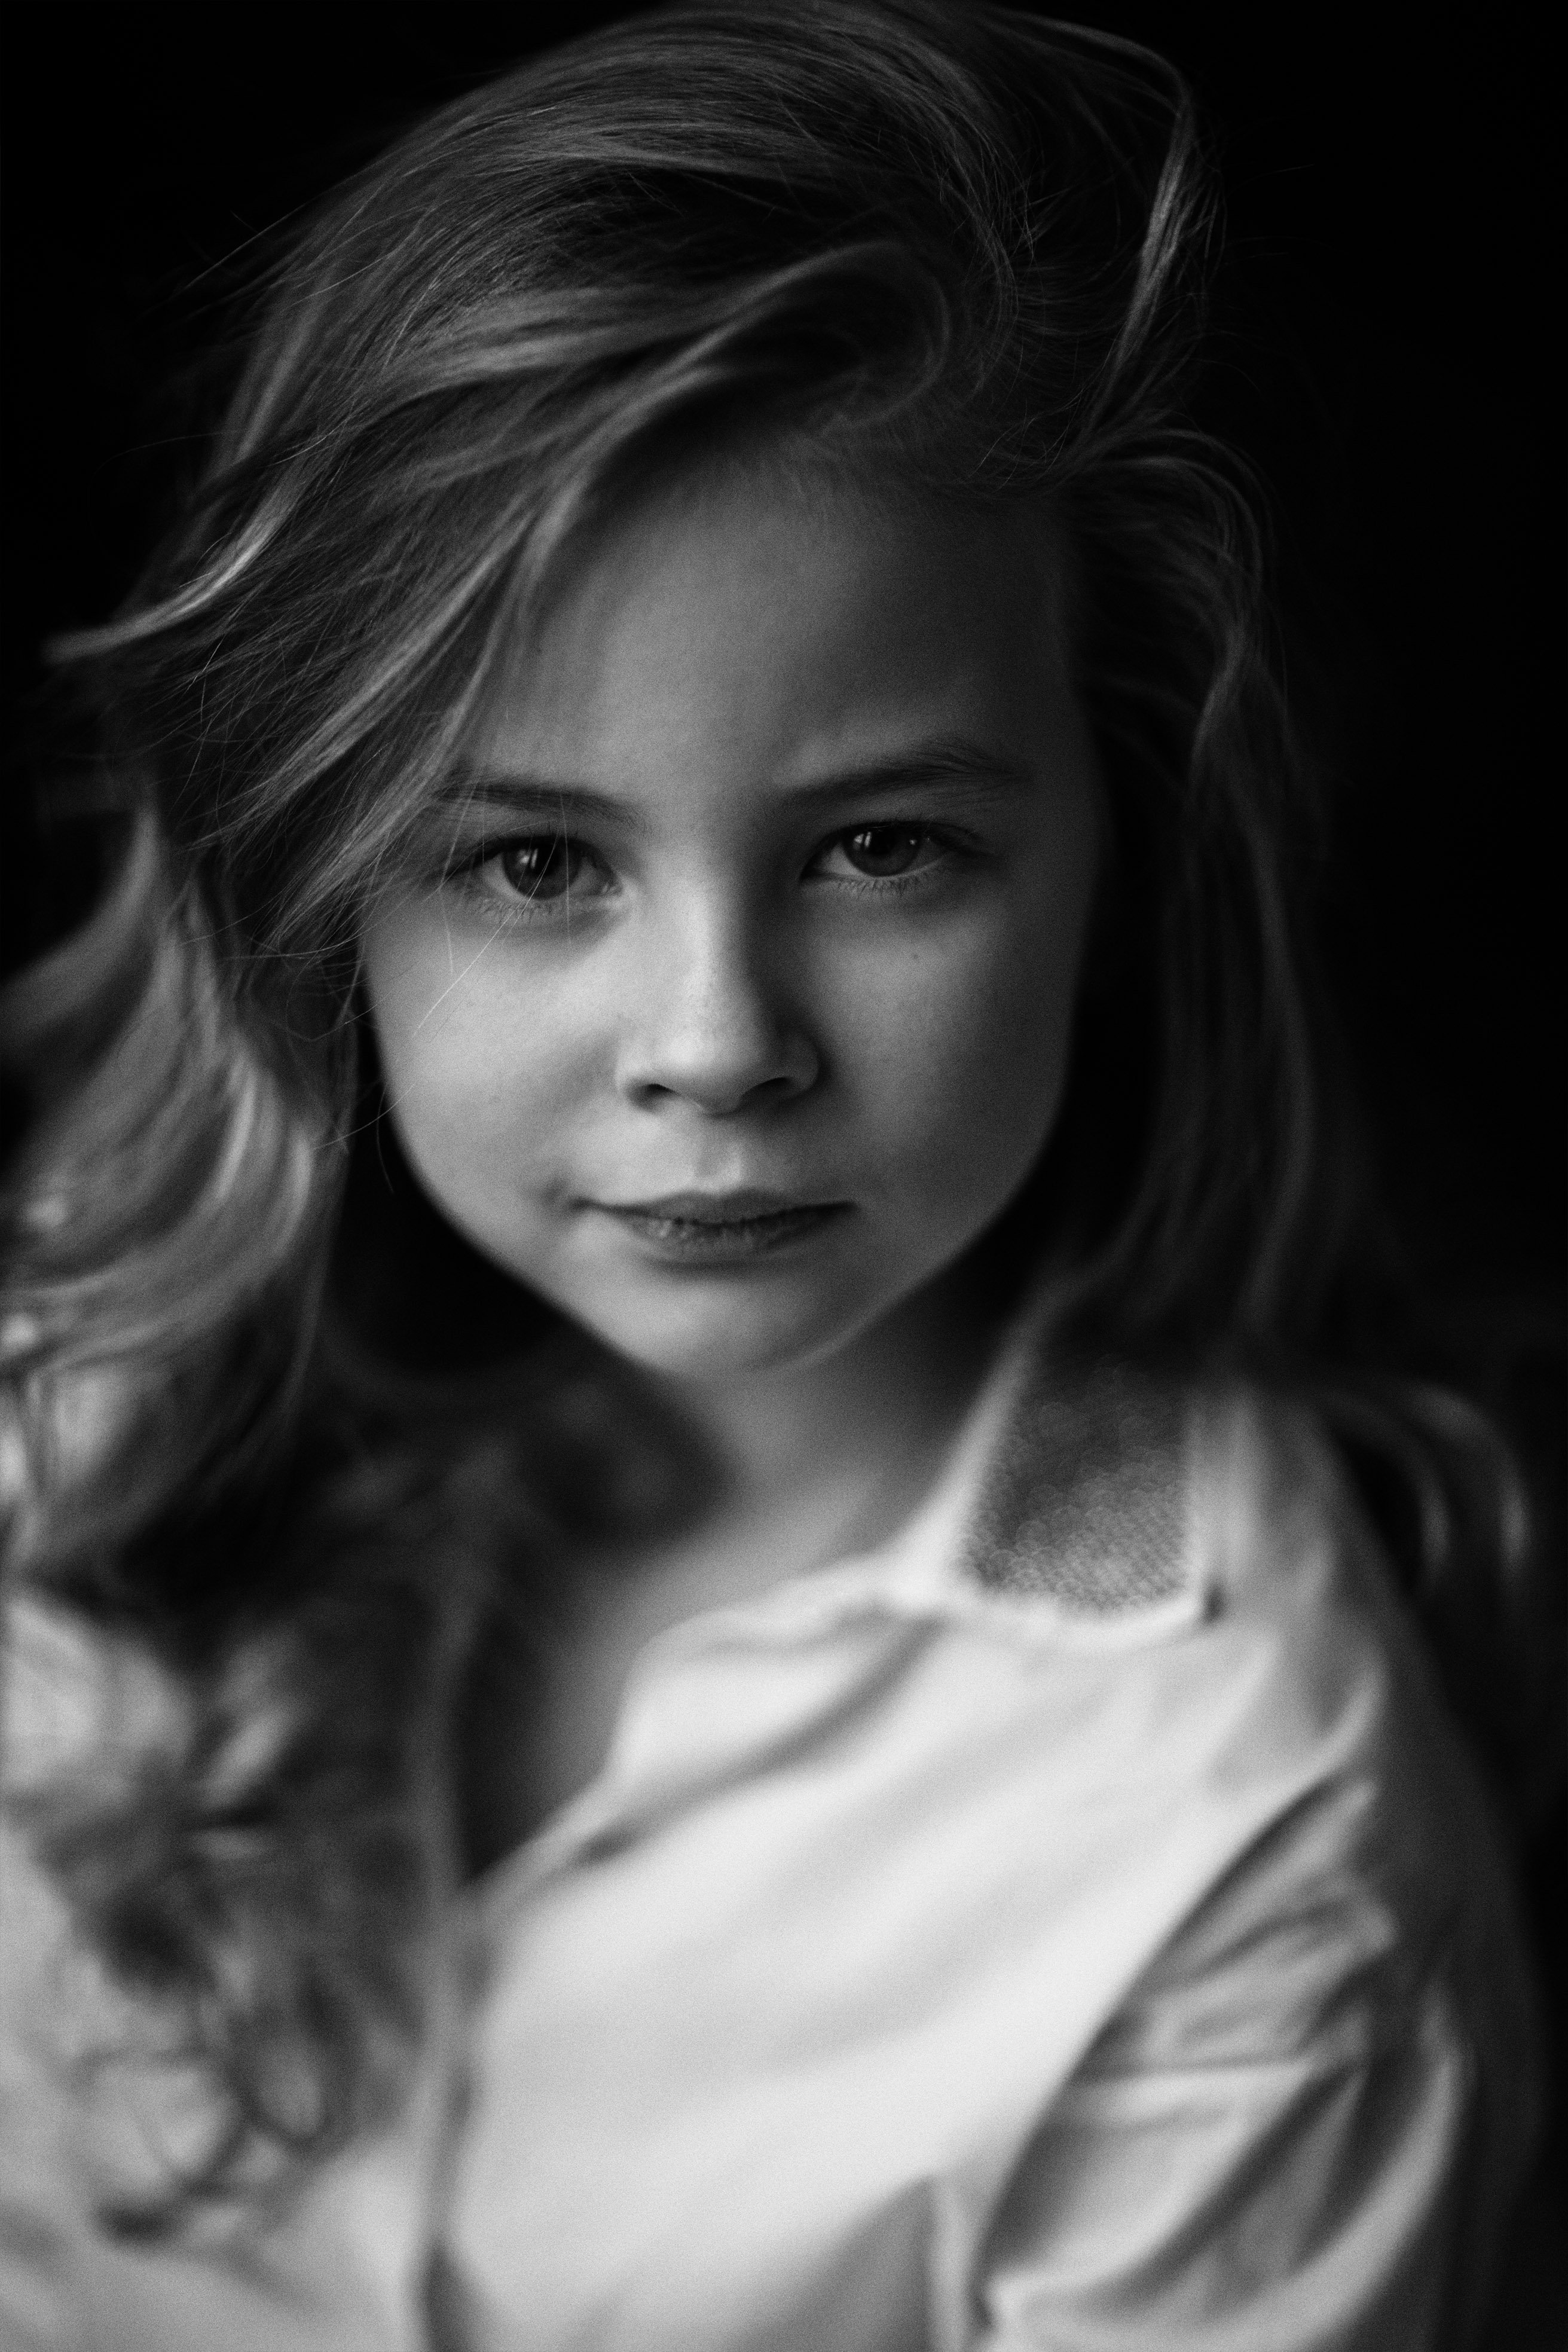 baby, girl, black and white, kid, child, eye, strong, passion, alone, childhood, Ekaterina Dema